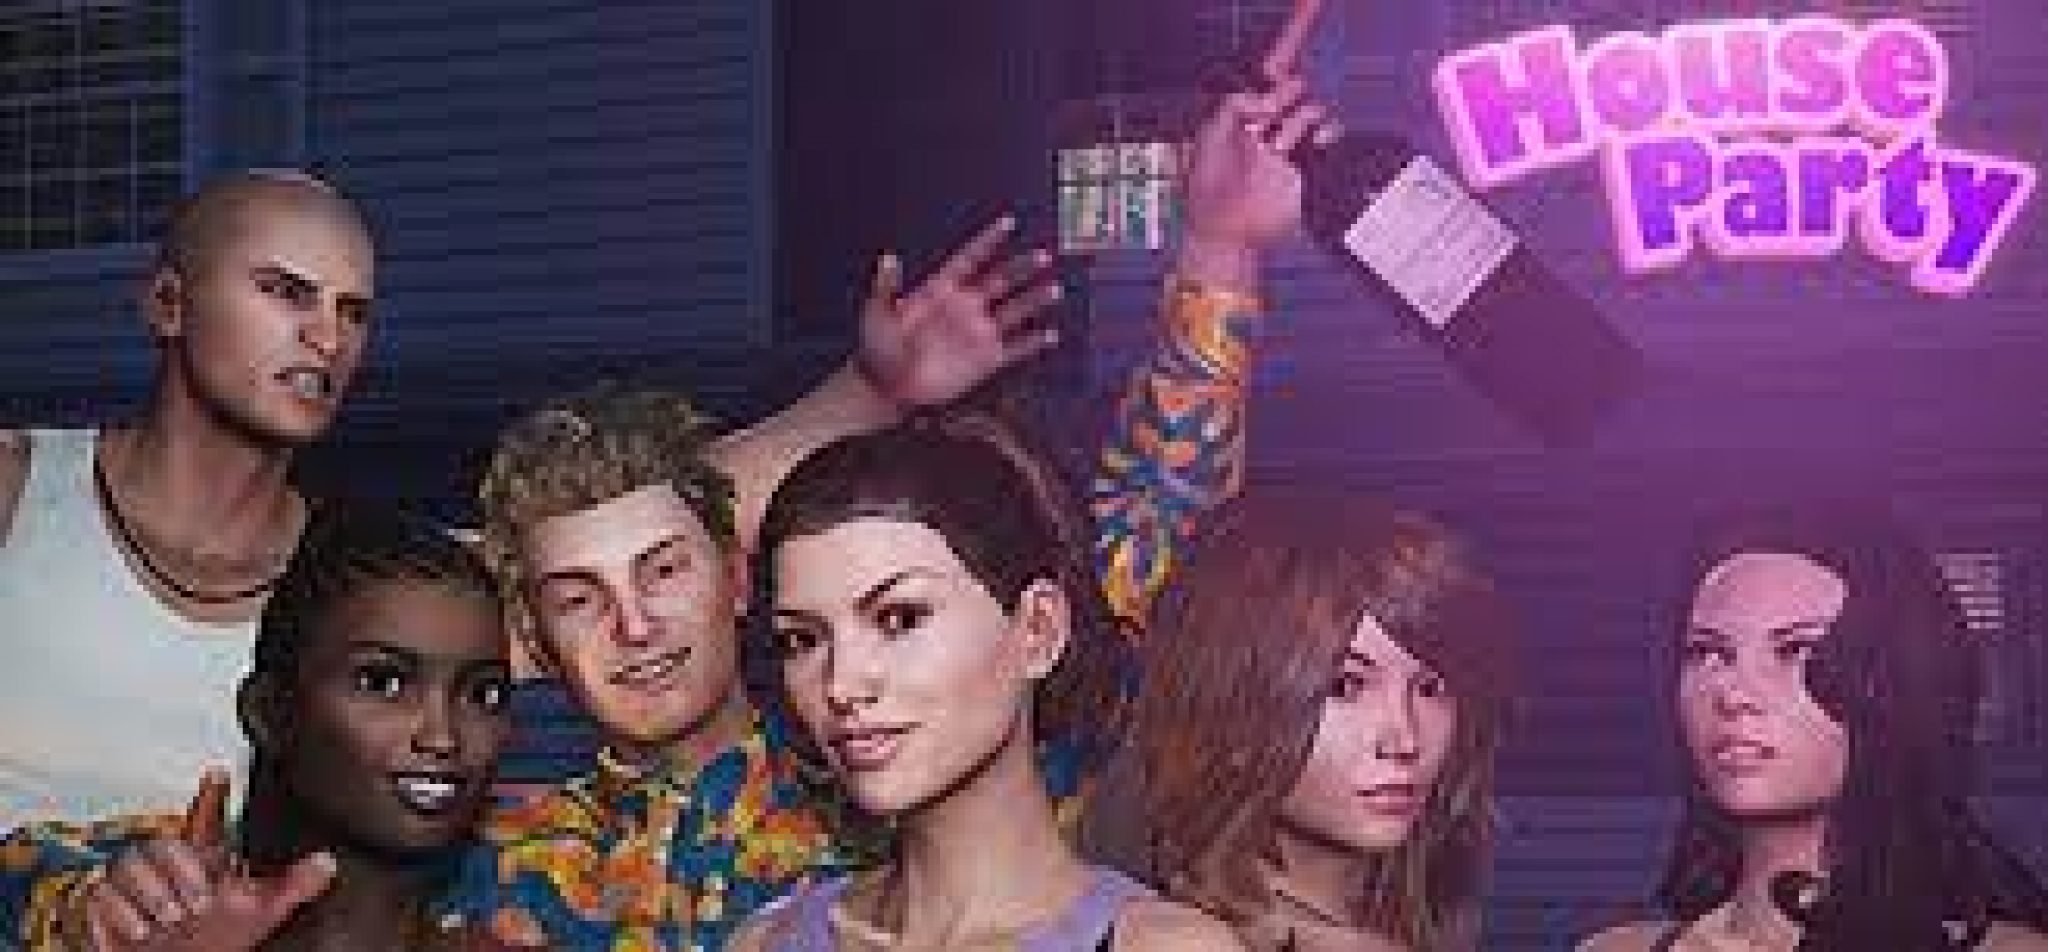 house party video game free download